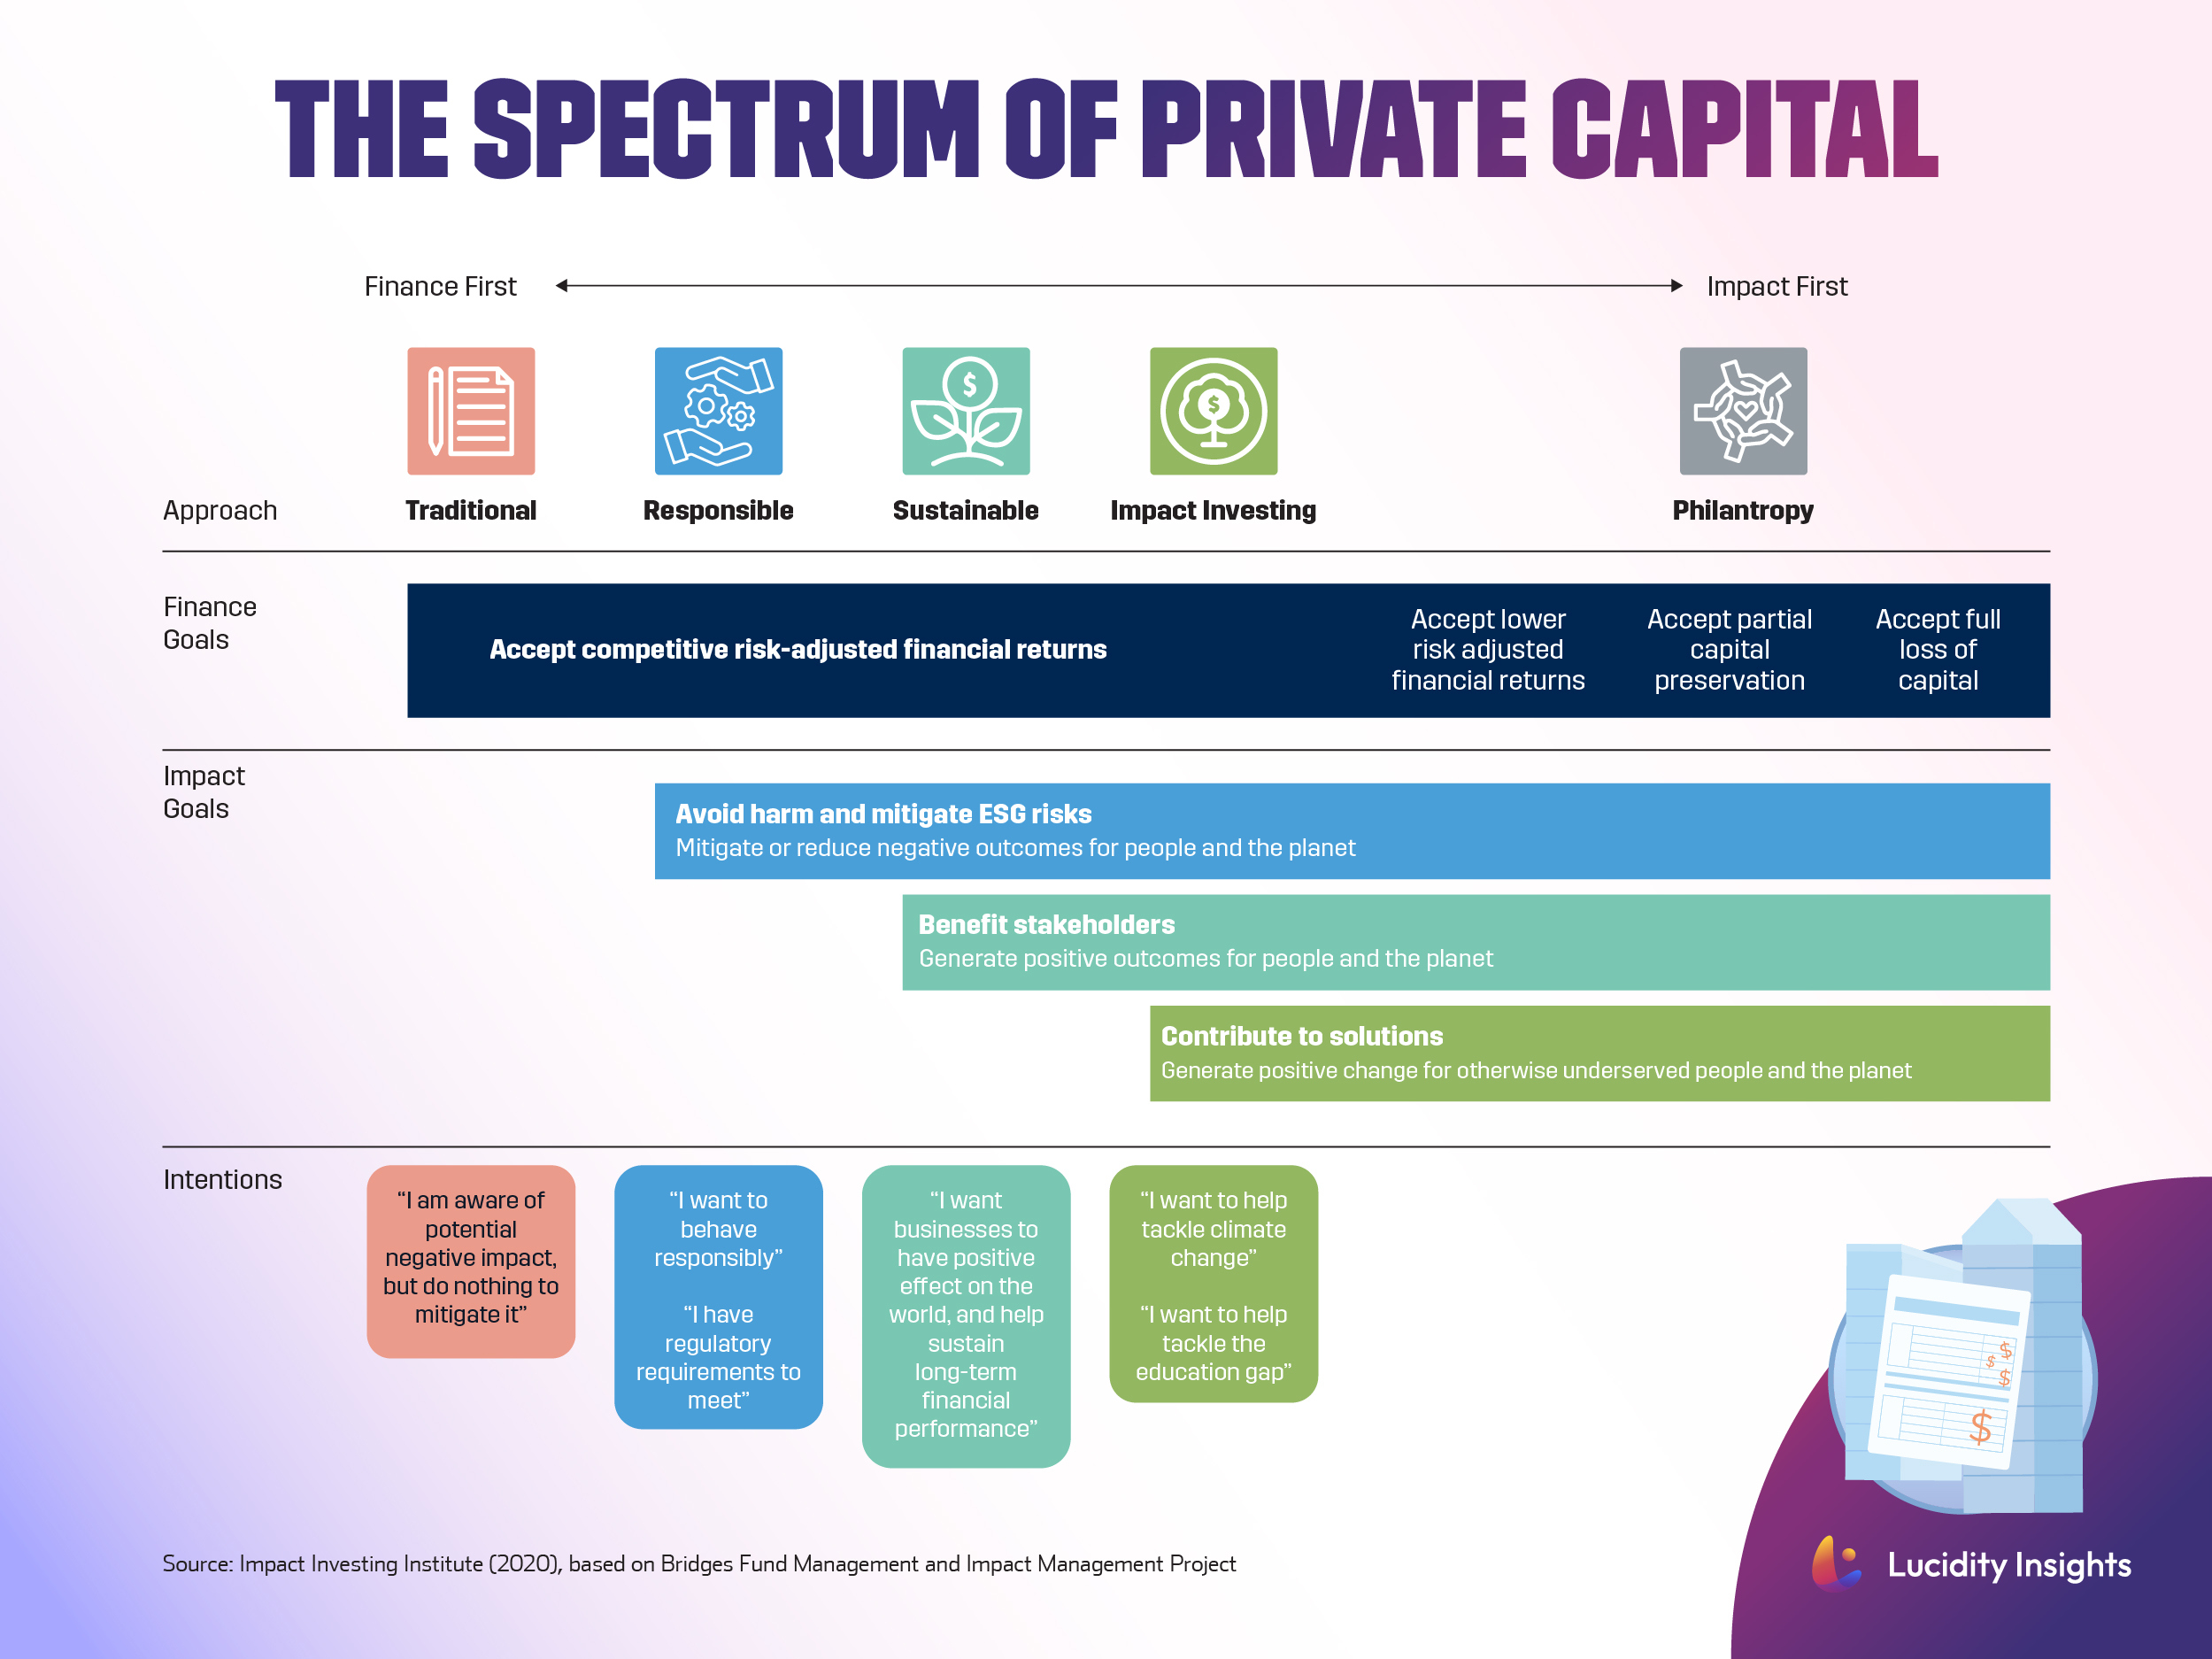 The Spectrum of Private Capital